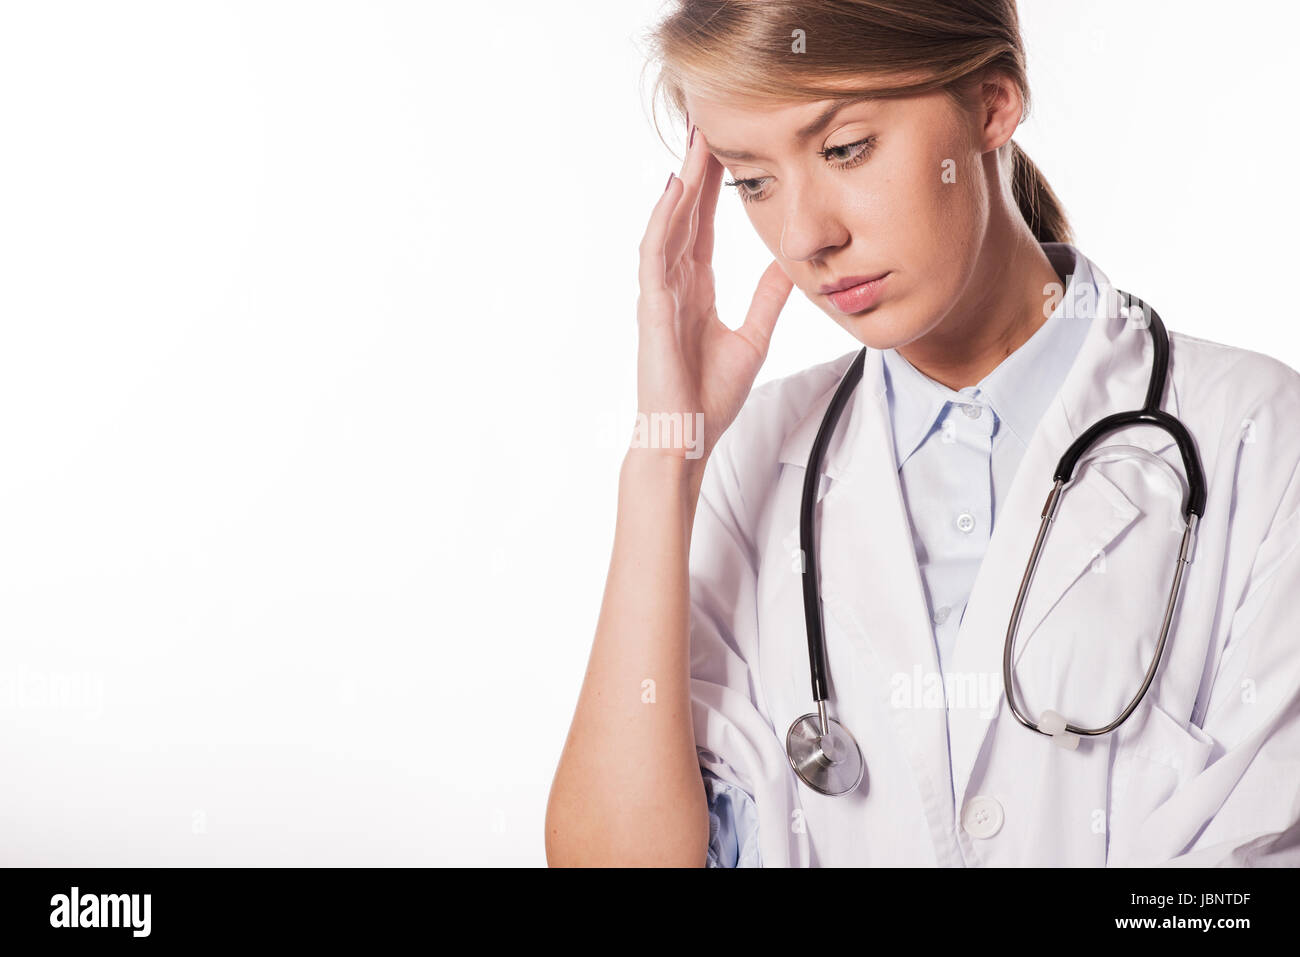 Woman Nurse / doctor with migraine headache overworked and stressed. Health care professional in lab coat wearing stethoscope at hospital. Stock Photo